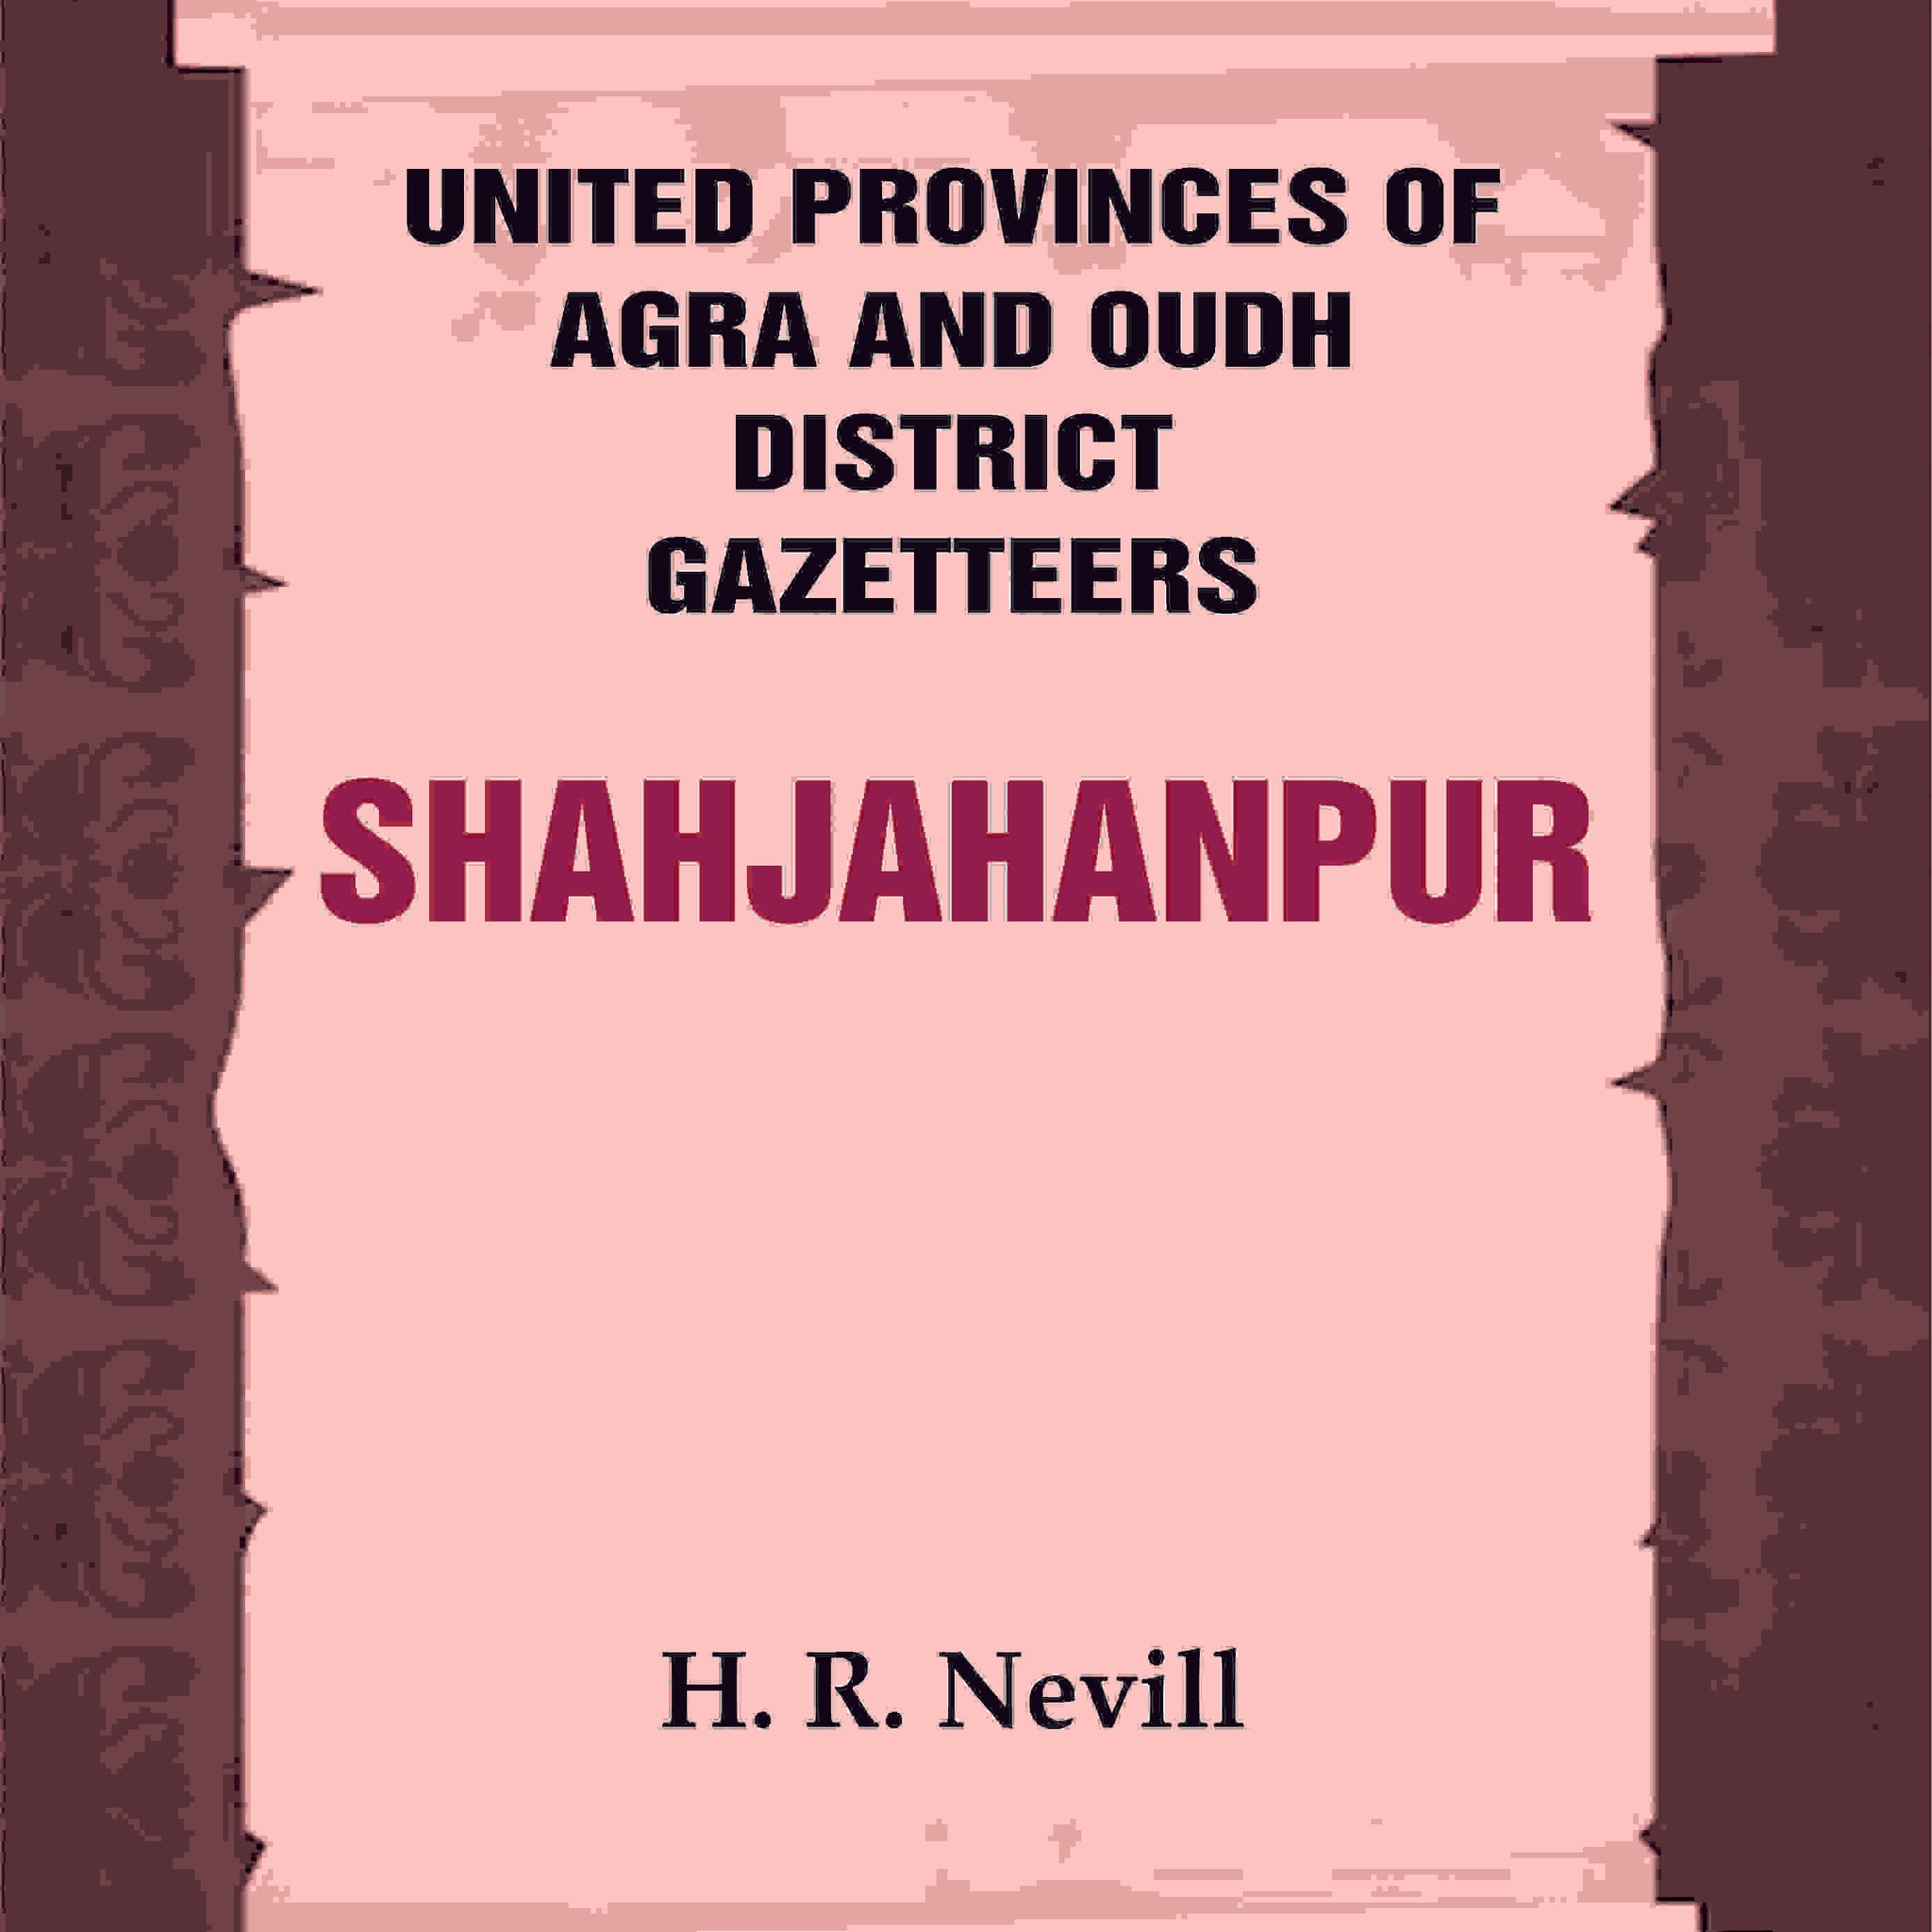 United Provinces of Agra and Oudh District Gazetteers: Shahjahanpur